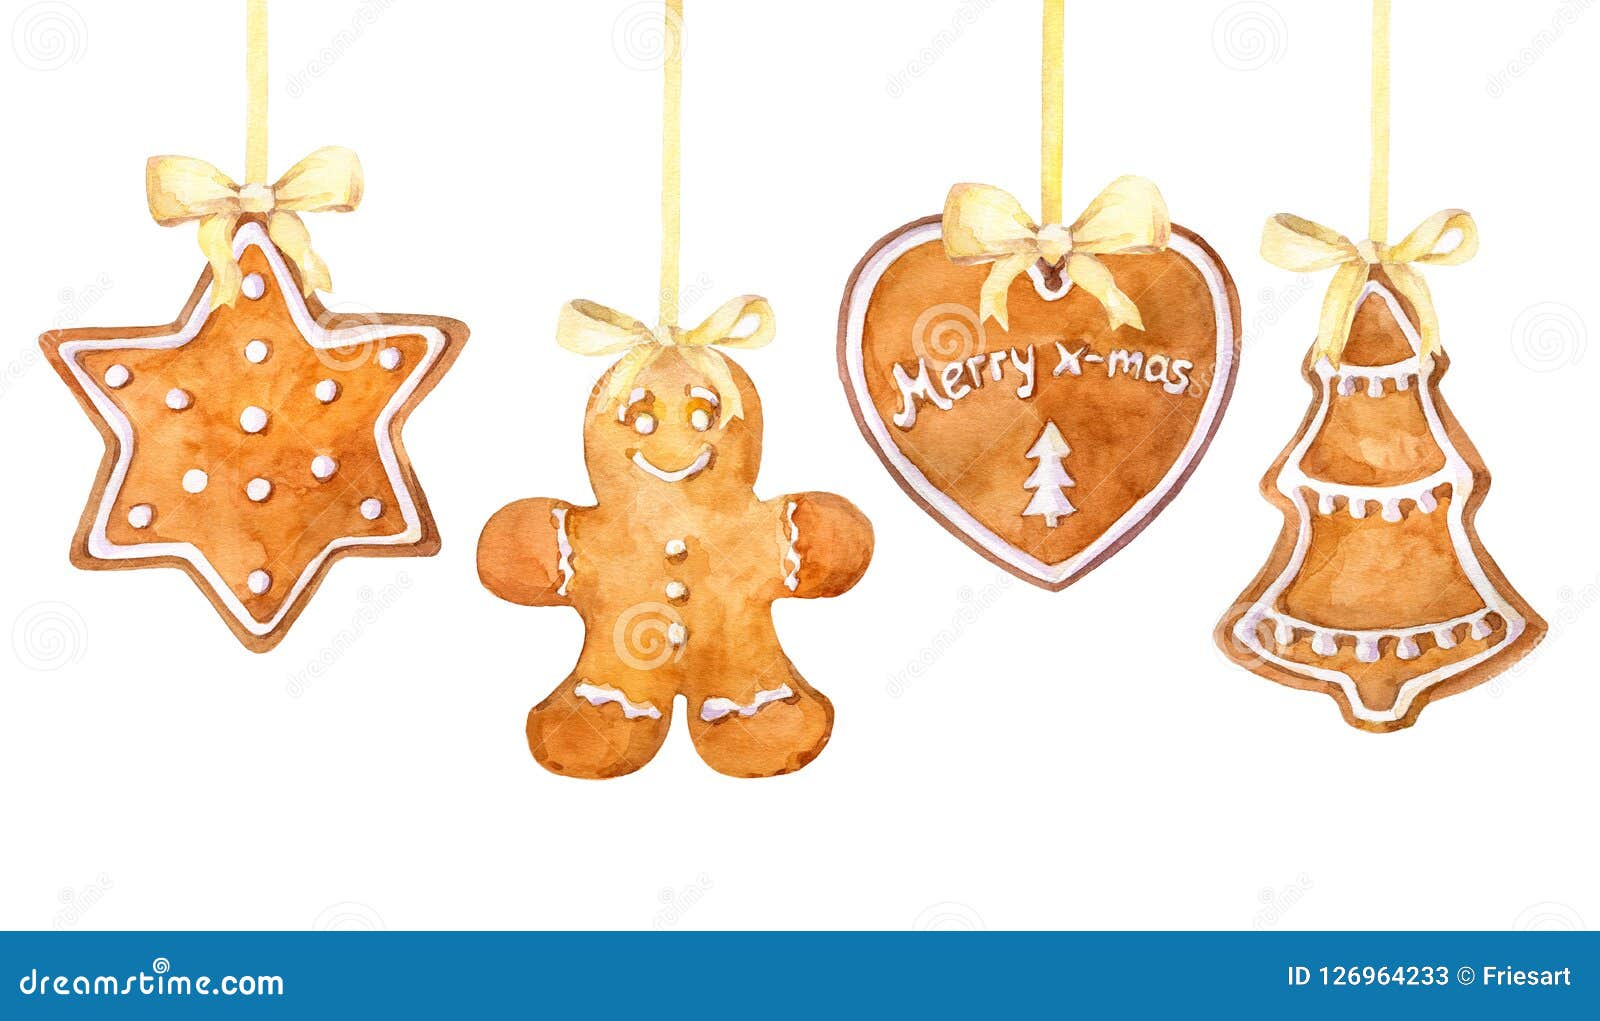 Christmas Gingerbread Cookies Hanging Border On A White Background Stock Illustration Illustration Of Holiday Celebration 126964233